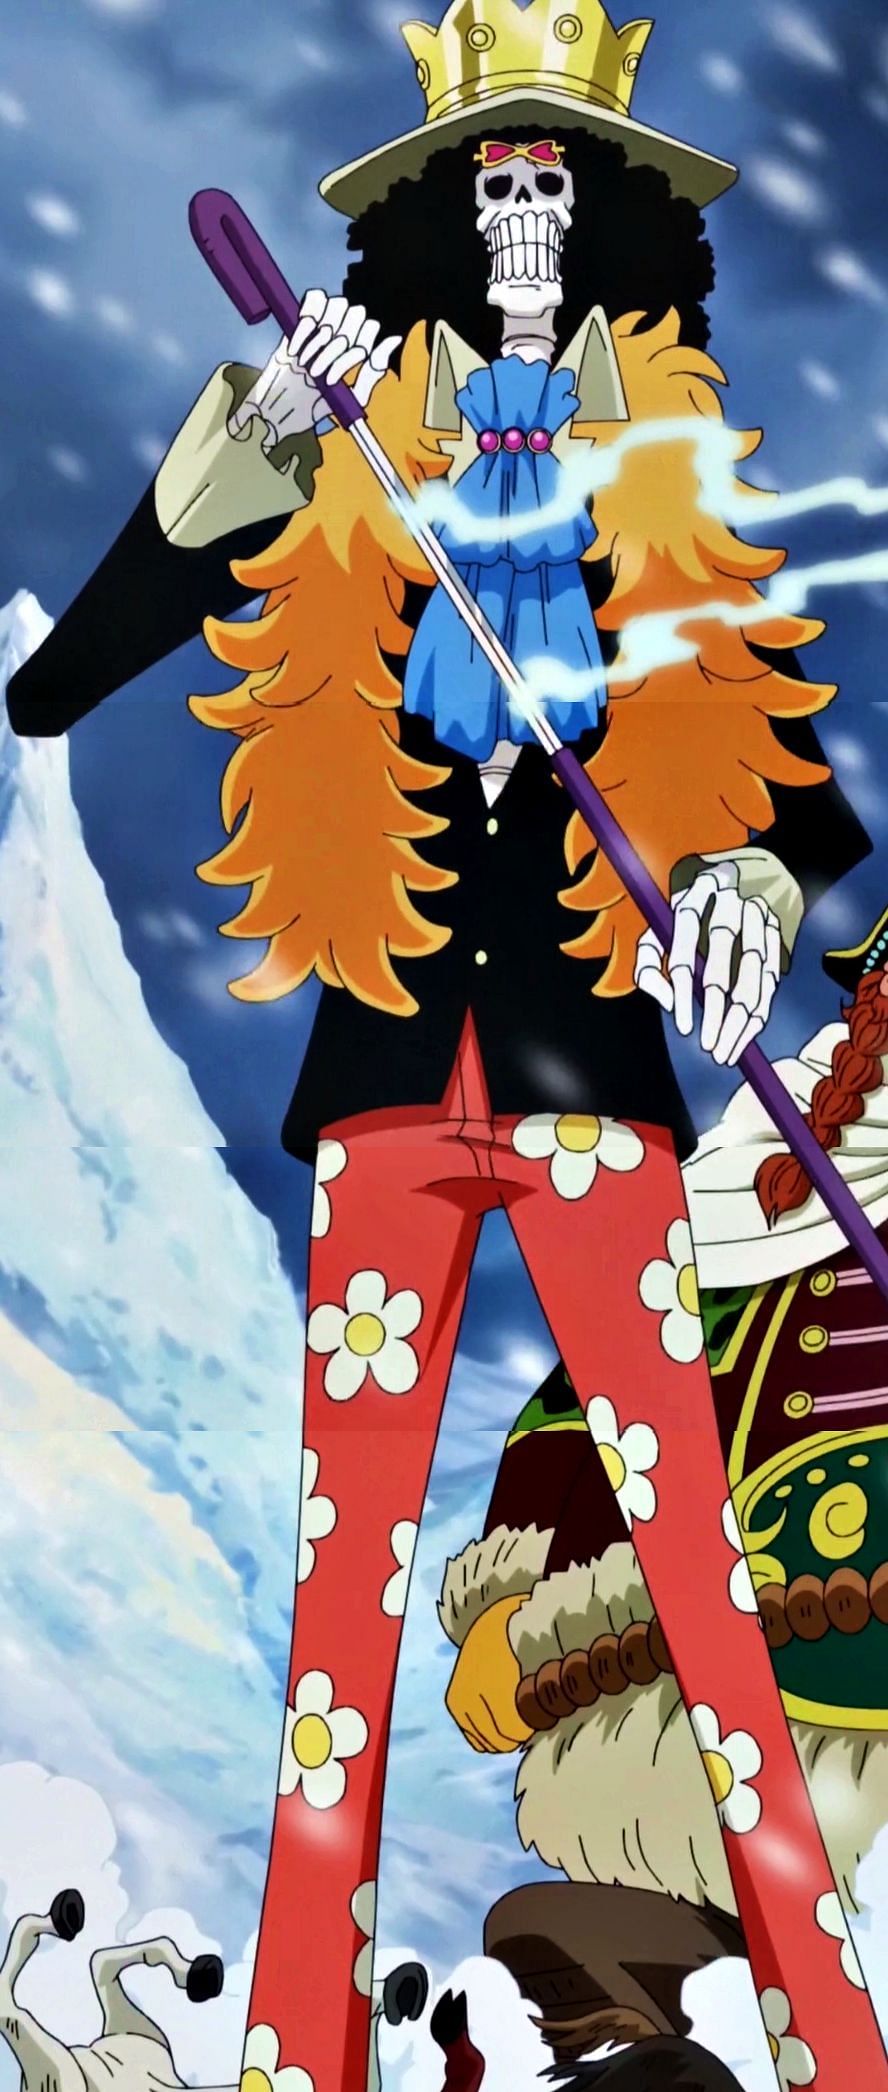 Brook&#039;s post time-skip design as seen in the One Piece anime. (Image via Toei Animation)